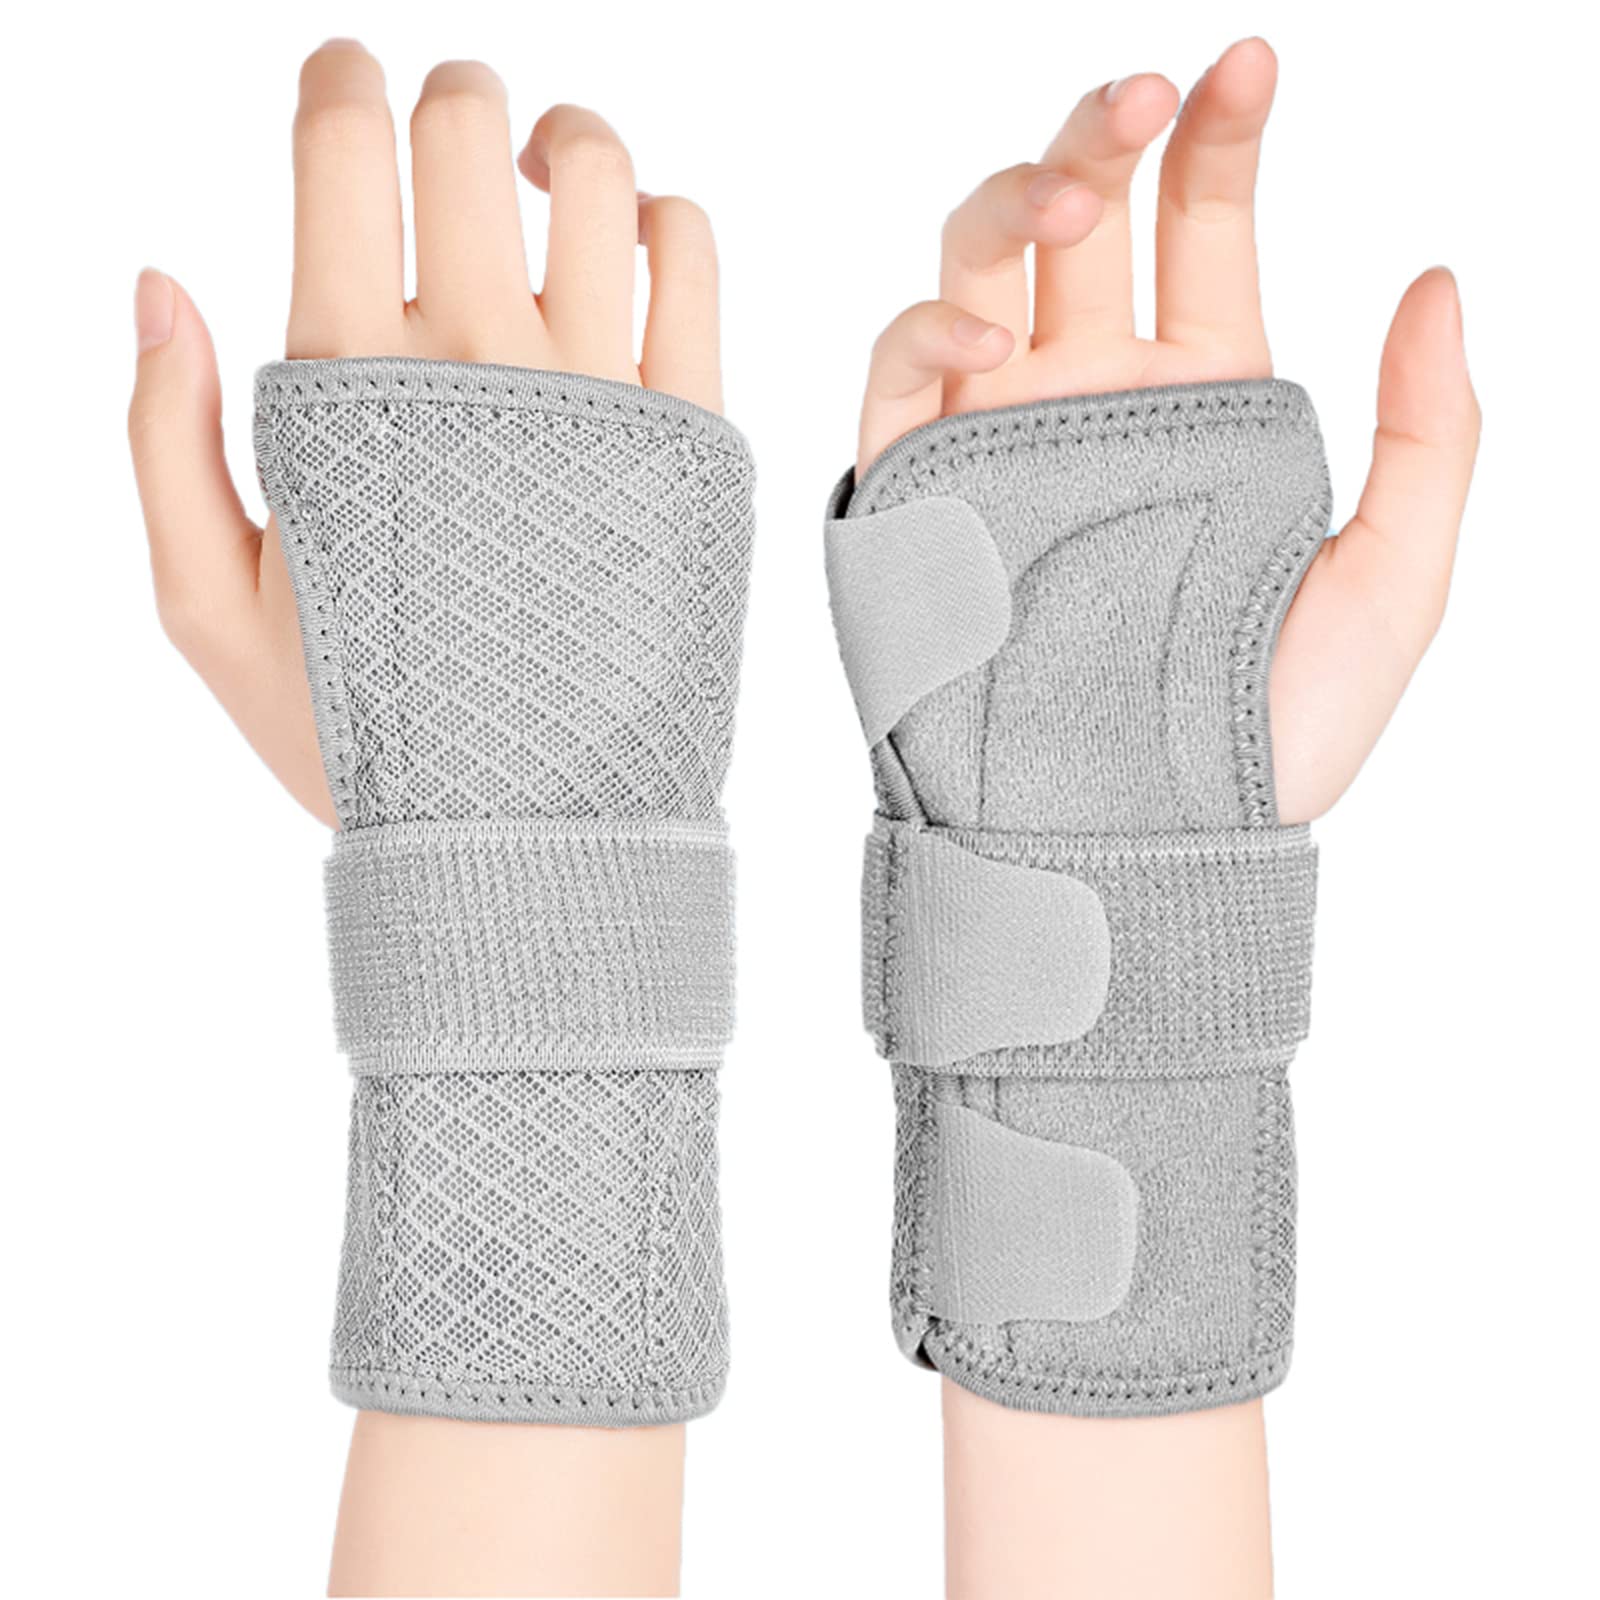 Elastic medical wrist joint bandage with a removable metallic